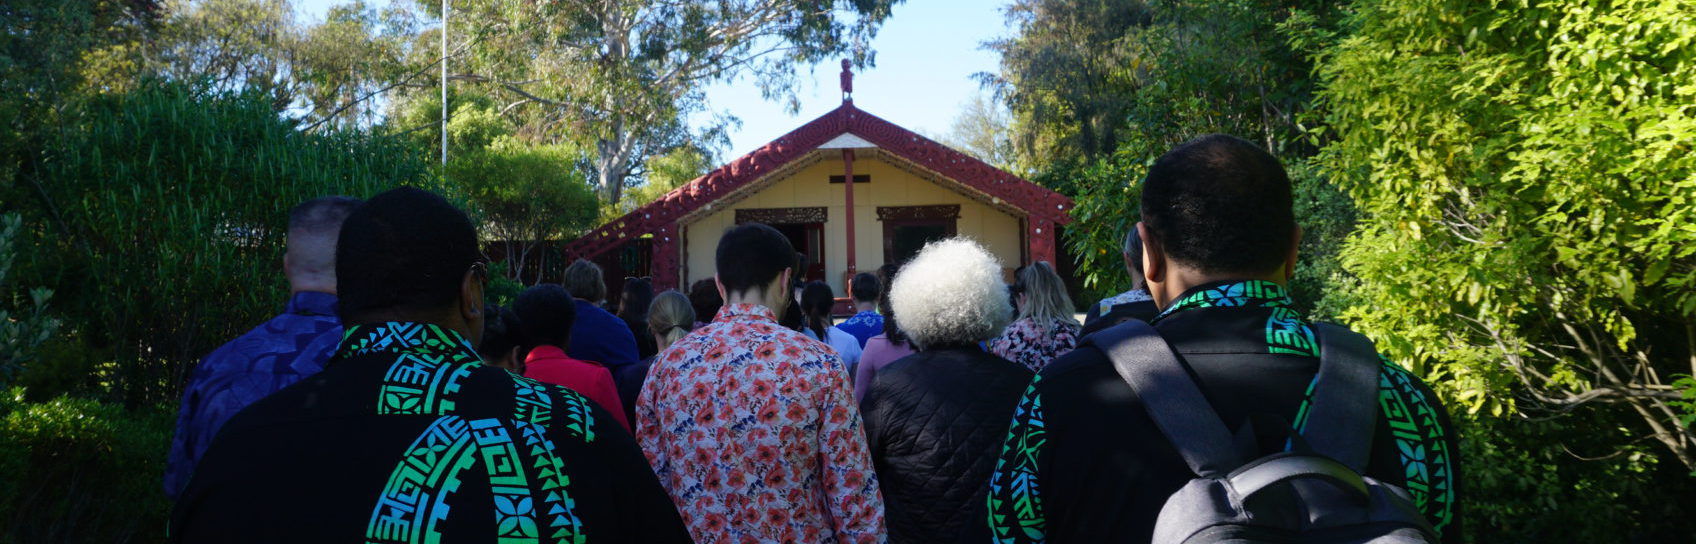 Participants at the gate of the Ōmaka marae